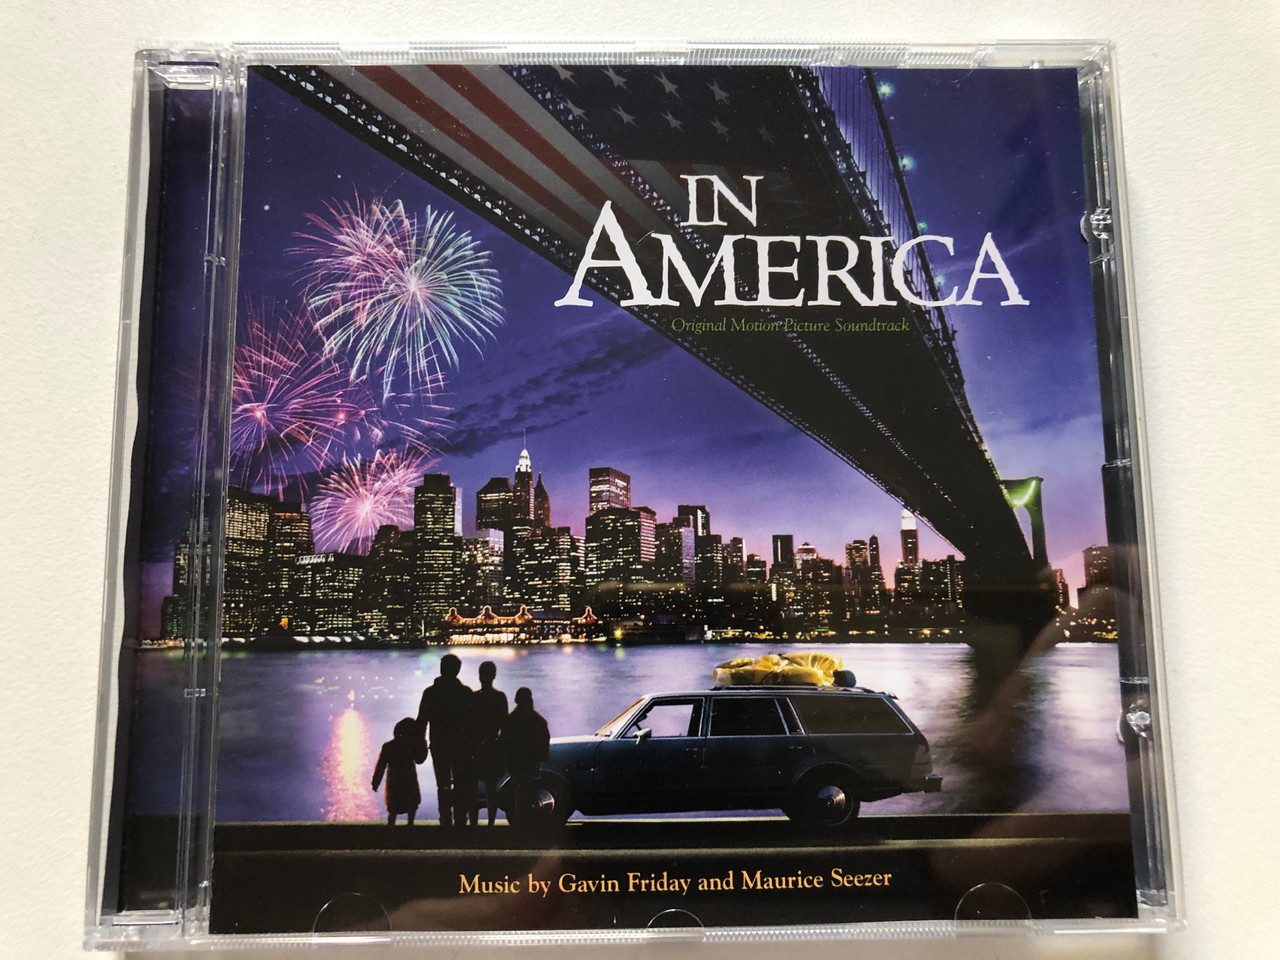 https://cdn10.bigcommerce.com/s-62bdpkt7pb/products/0/images/312774/In_America_Original_Motion_Picture_Soundtrack_-_Music_by_Gavin_Friday_and_Maurice_Seezer_Atlantic_Audio_CD_2003_7567-83706-2_1__21823.1700144089.1280.1280.JPG?c=2